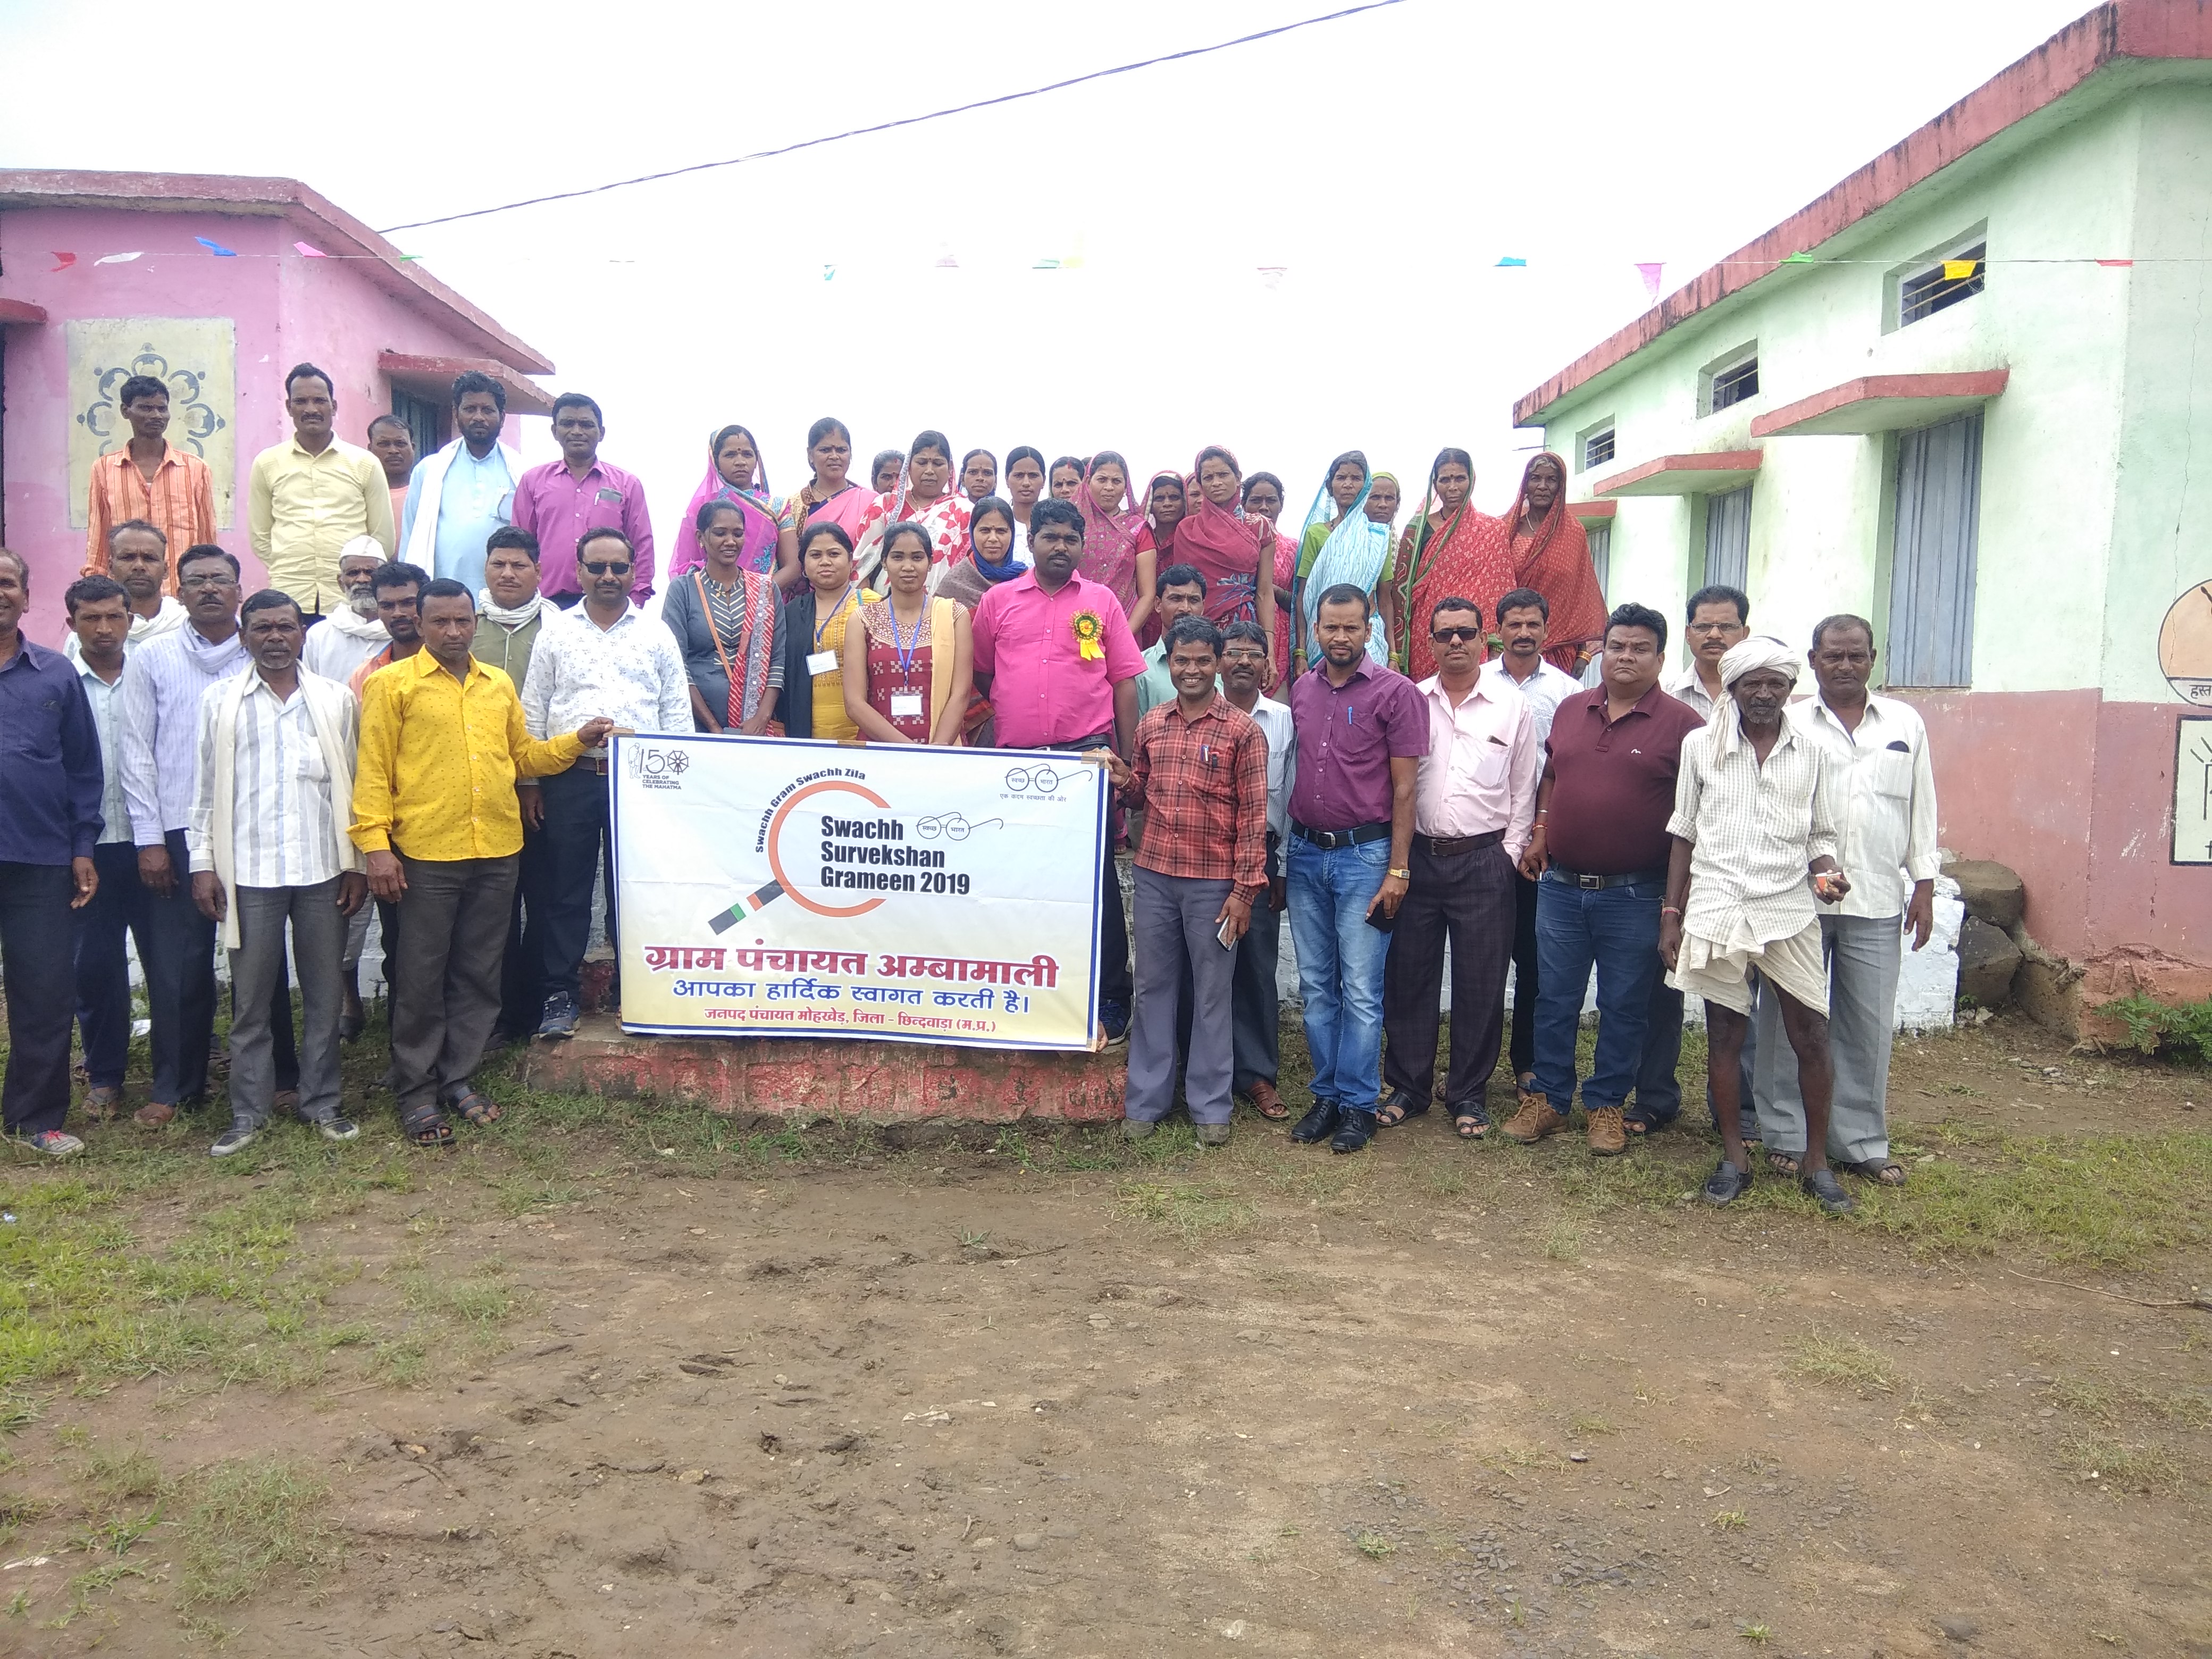 Cleanliness survey team reached panchayats